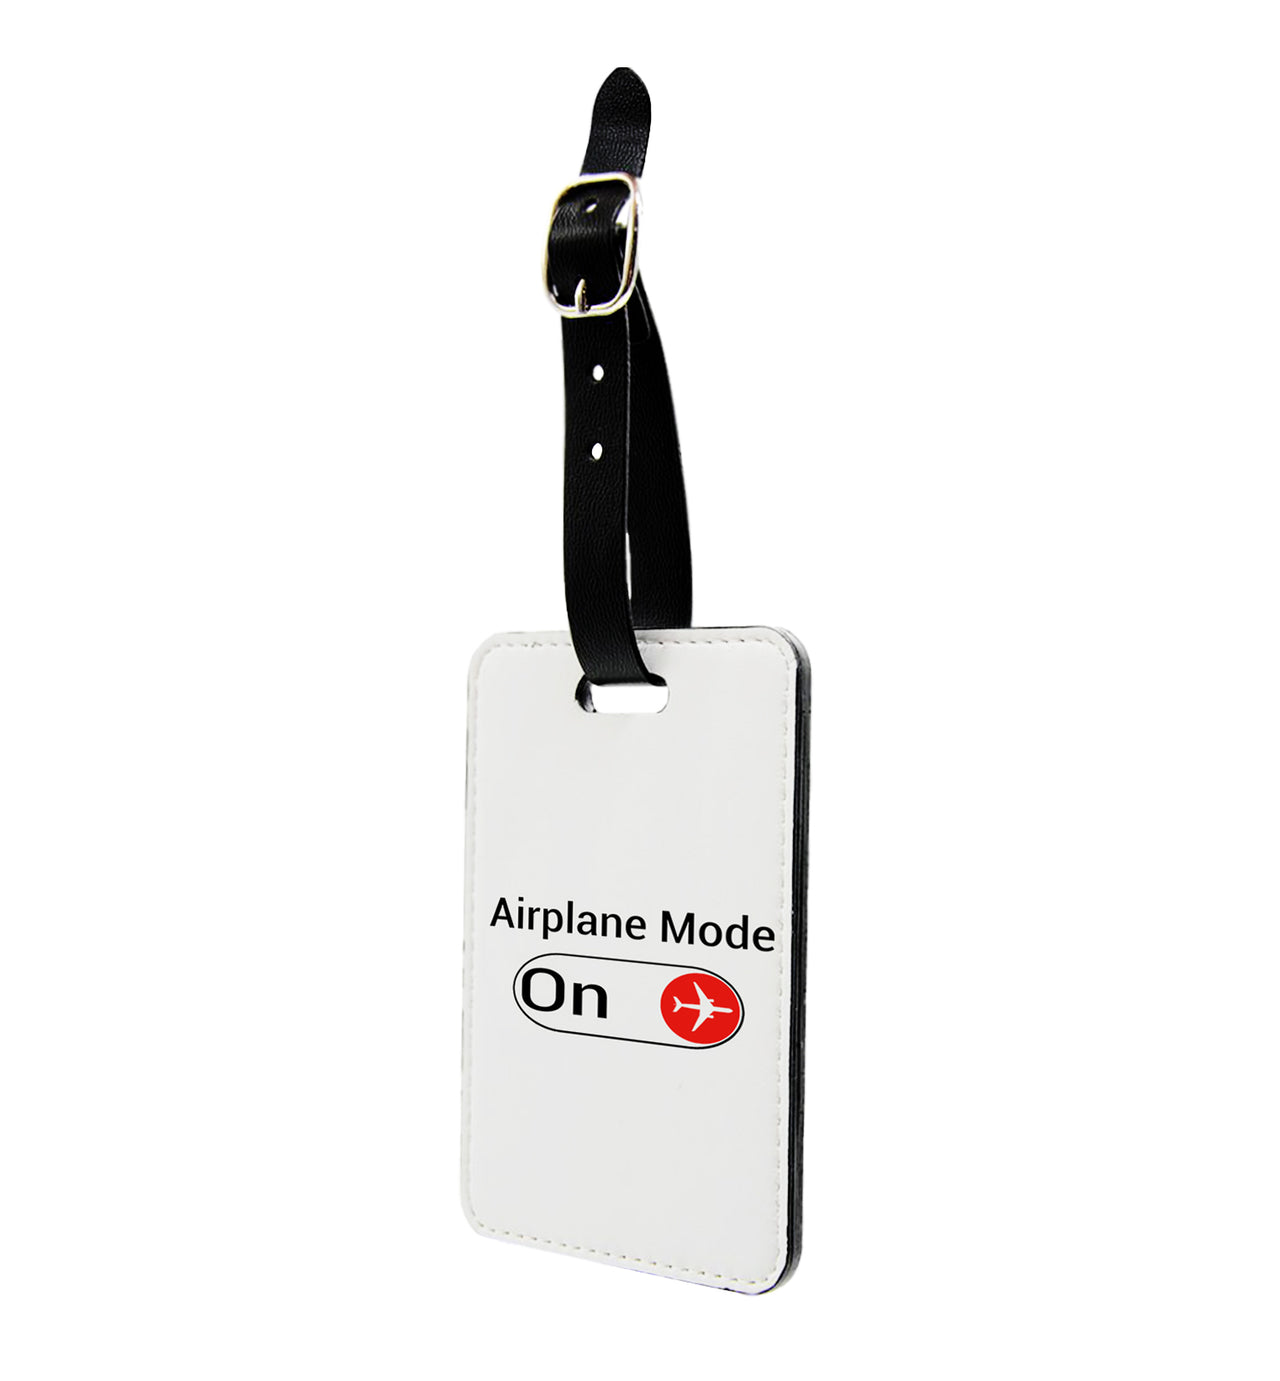 Airplane Mode On Designed Luggage Tag